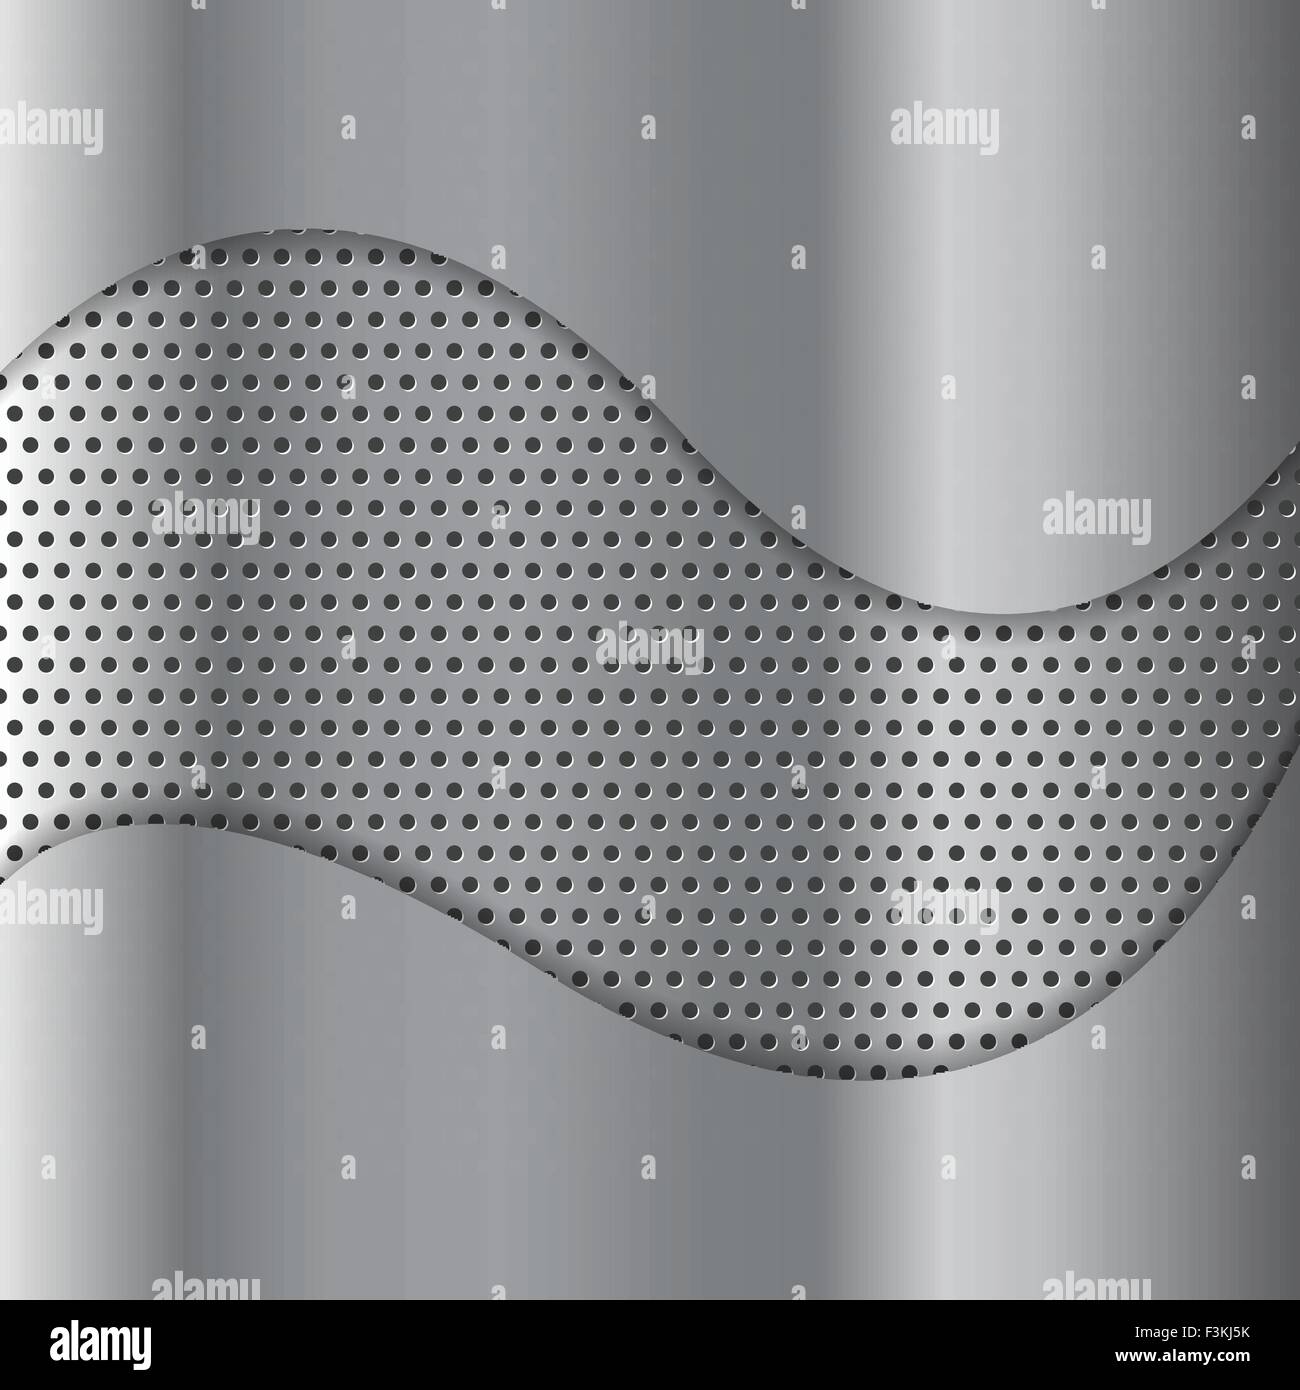 Abstract perforated metal texture vector design Stock Vector Image ...